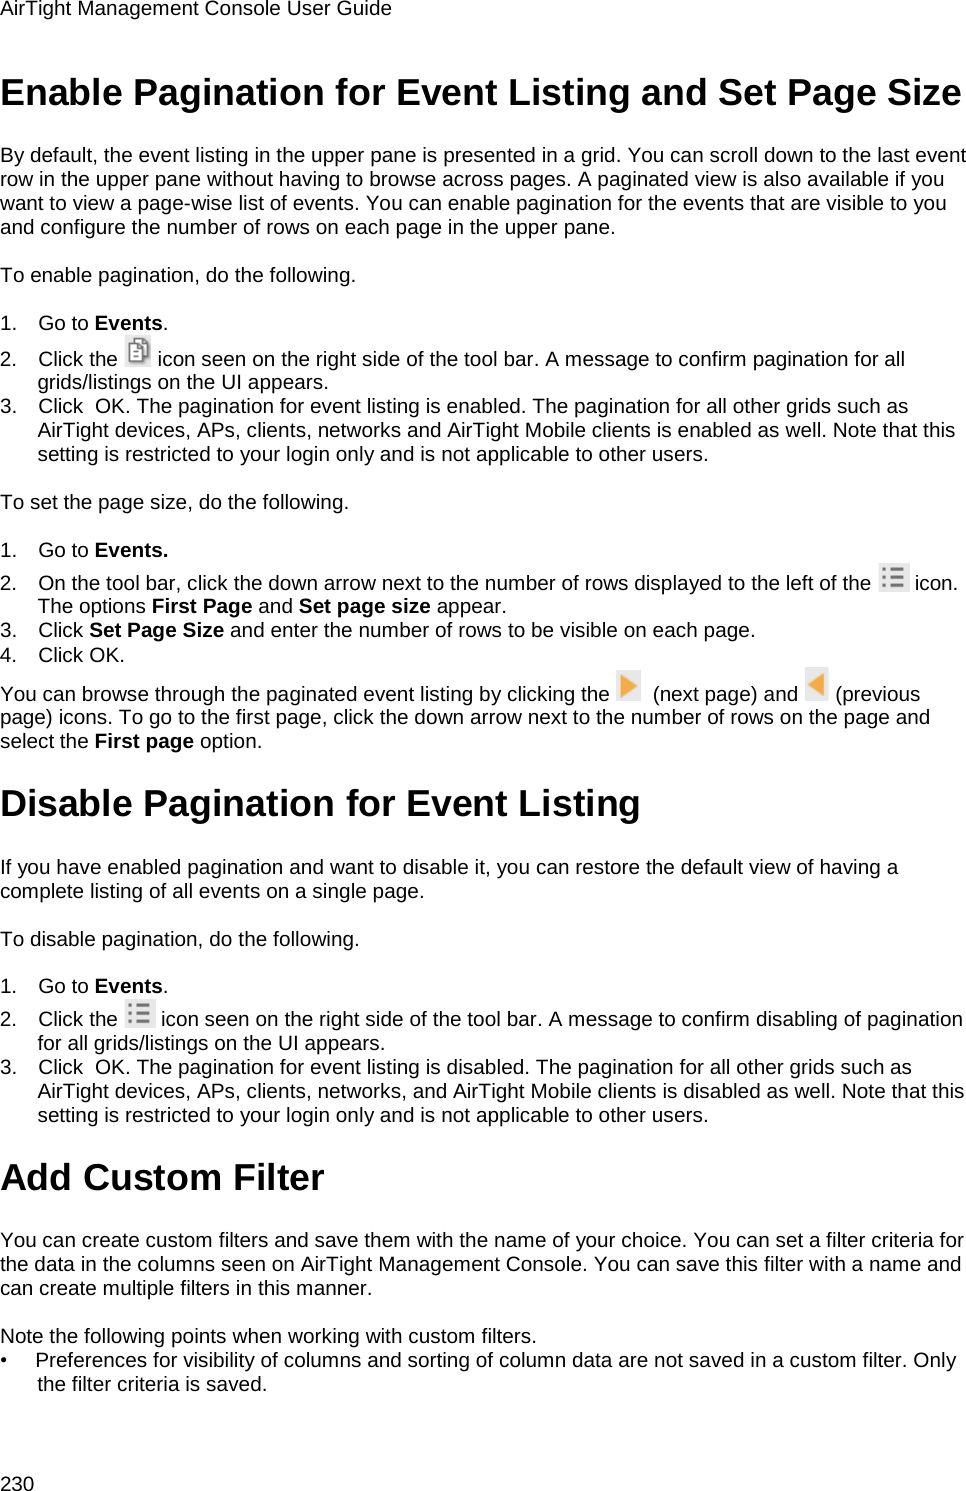 AirTight Management Console User Guide 230 Enable Pagination for Event Listing and Set Page Size By default, the event listing in the upper pane is presented in a grid. You can scroll down to the last event row in the upper pane without having to browse across pages. A paginated view is also available if you want to view a page-wise list of events. You can enable pagination for the events that are visible to you and configure the number of rows on each page in the upper pane.    To enable pagination, do the following.   1.      Go to Events. 2.      Click the   icon seen on the right side of the tool bar. A message to confirm pagination for all grids/listings on the UI appears. 3.      Click  OK. The pagination for event listing is enabled. The pagination for all other grids such as AirTight devices, APs, clients, networks and AirTight Mobile clients is enabled as well. Note that this setting is restricted to your login only and is not applicable to other users.    To set the page size, do the following.   1.      Go to Events. 2.      On the tool bar, click the down arrow next to the number of rows displayed to the left of the   icon. The options First Page and Set page size appear. 3.      Click Set Page Size and enter the number of rows to be visible on each page. 4.      Click OK. You can browse through the paginated event listing by clicking the    (next page) and   (previous page) icons. To go to the first page, click the down arrow next to the number of rows on the page and select the First page option. Disable Pagination for Event Listing If you have enabled pagination and want to disable it, you can restore the default view of having a complete listing of all events on a single page.    To disable pagination, do the following.   1.      Go to Events. 2.      Click the   icon seen on the right side of the tool bar. A message to confirm disabling of pagination for all grids/listings on the UI appears. 3.      Click  OK. The pagination for event listing is disabled. The pagination for all other grids such as AirTight devices, APs, clients, networks, and AirTight Mobile clients is disabled as well. Note that this setting is restricted to your login only and is not applicable to other users. Add Custom Filter You can create custom filters and save them with the name of your choice. You can set a filter criteria for the data in the columns seen on AirTight Management Console. You can save this filter with a name and can create multiple filters in this manner.    Note the following points when working with custom filters. •        Preferences for visibility of columns and sorting of column data are not saved in a custom filter. Only the filter criteria is saved. 